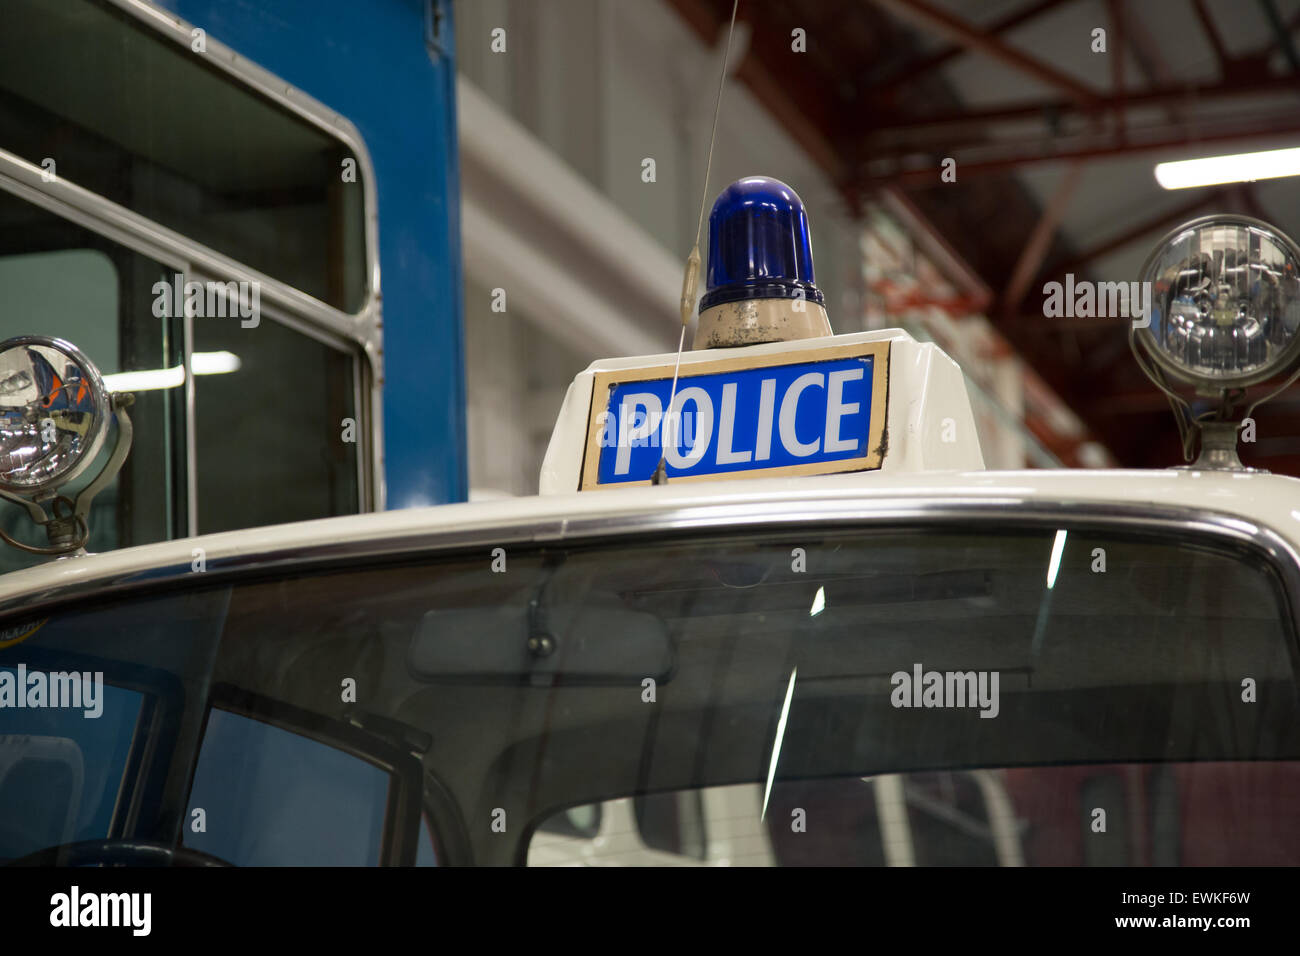 Vintage Police car Transport Museum Coventry UK Stock Photo